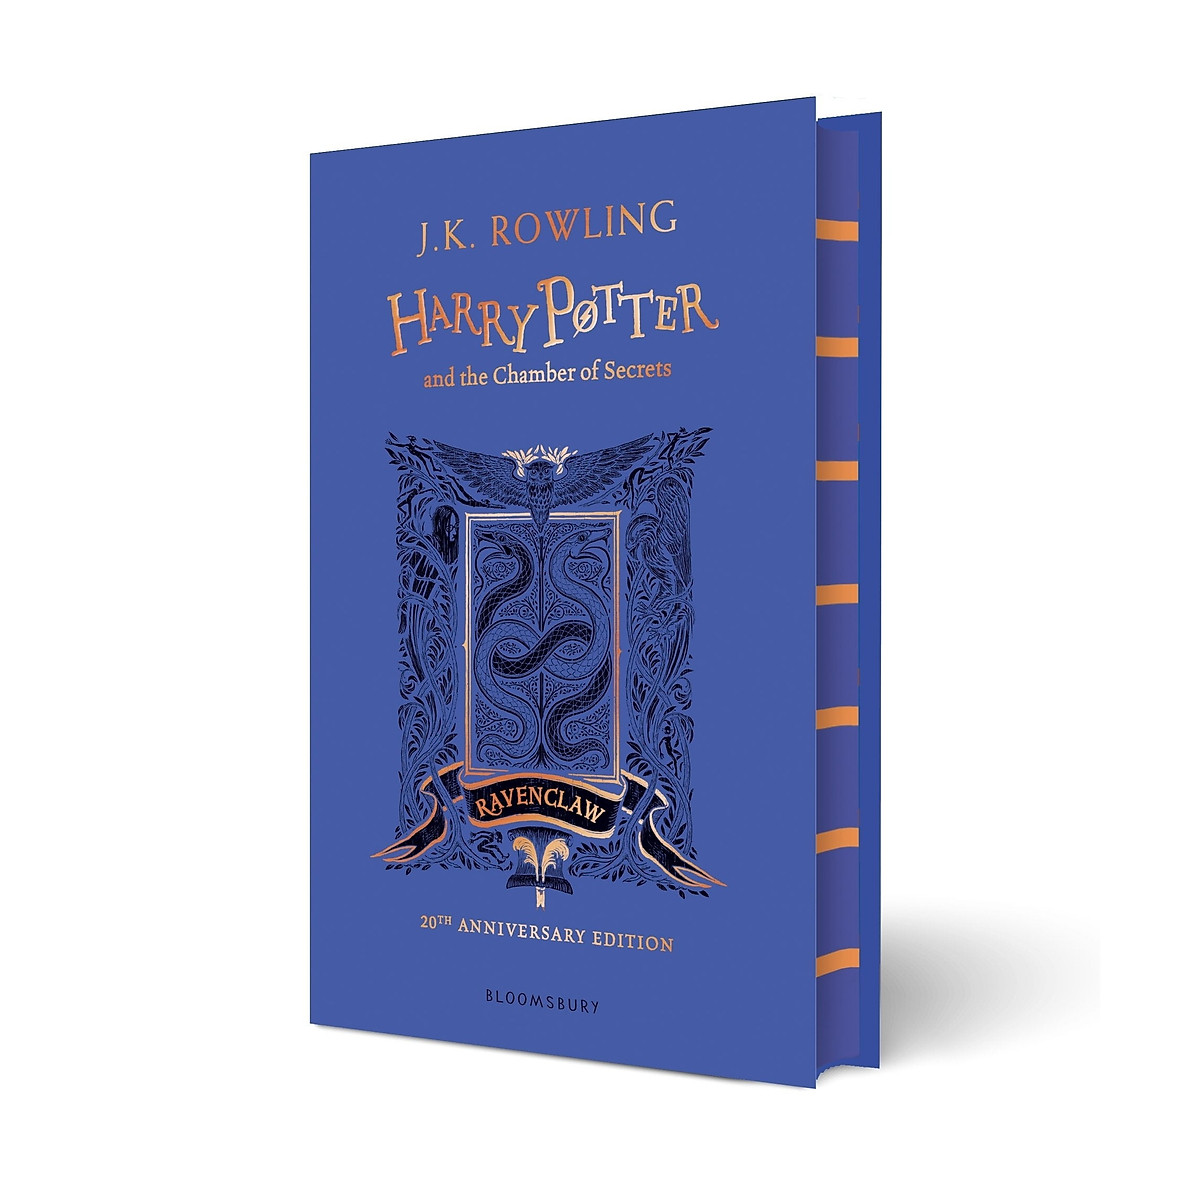 Harry Potter And The Chamber Of Secrets – Ravenclaw Edition (Hardback)